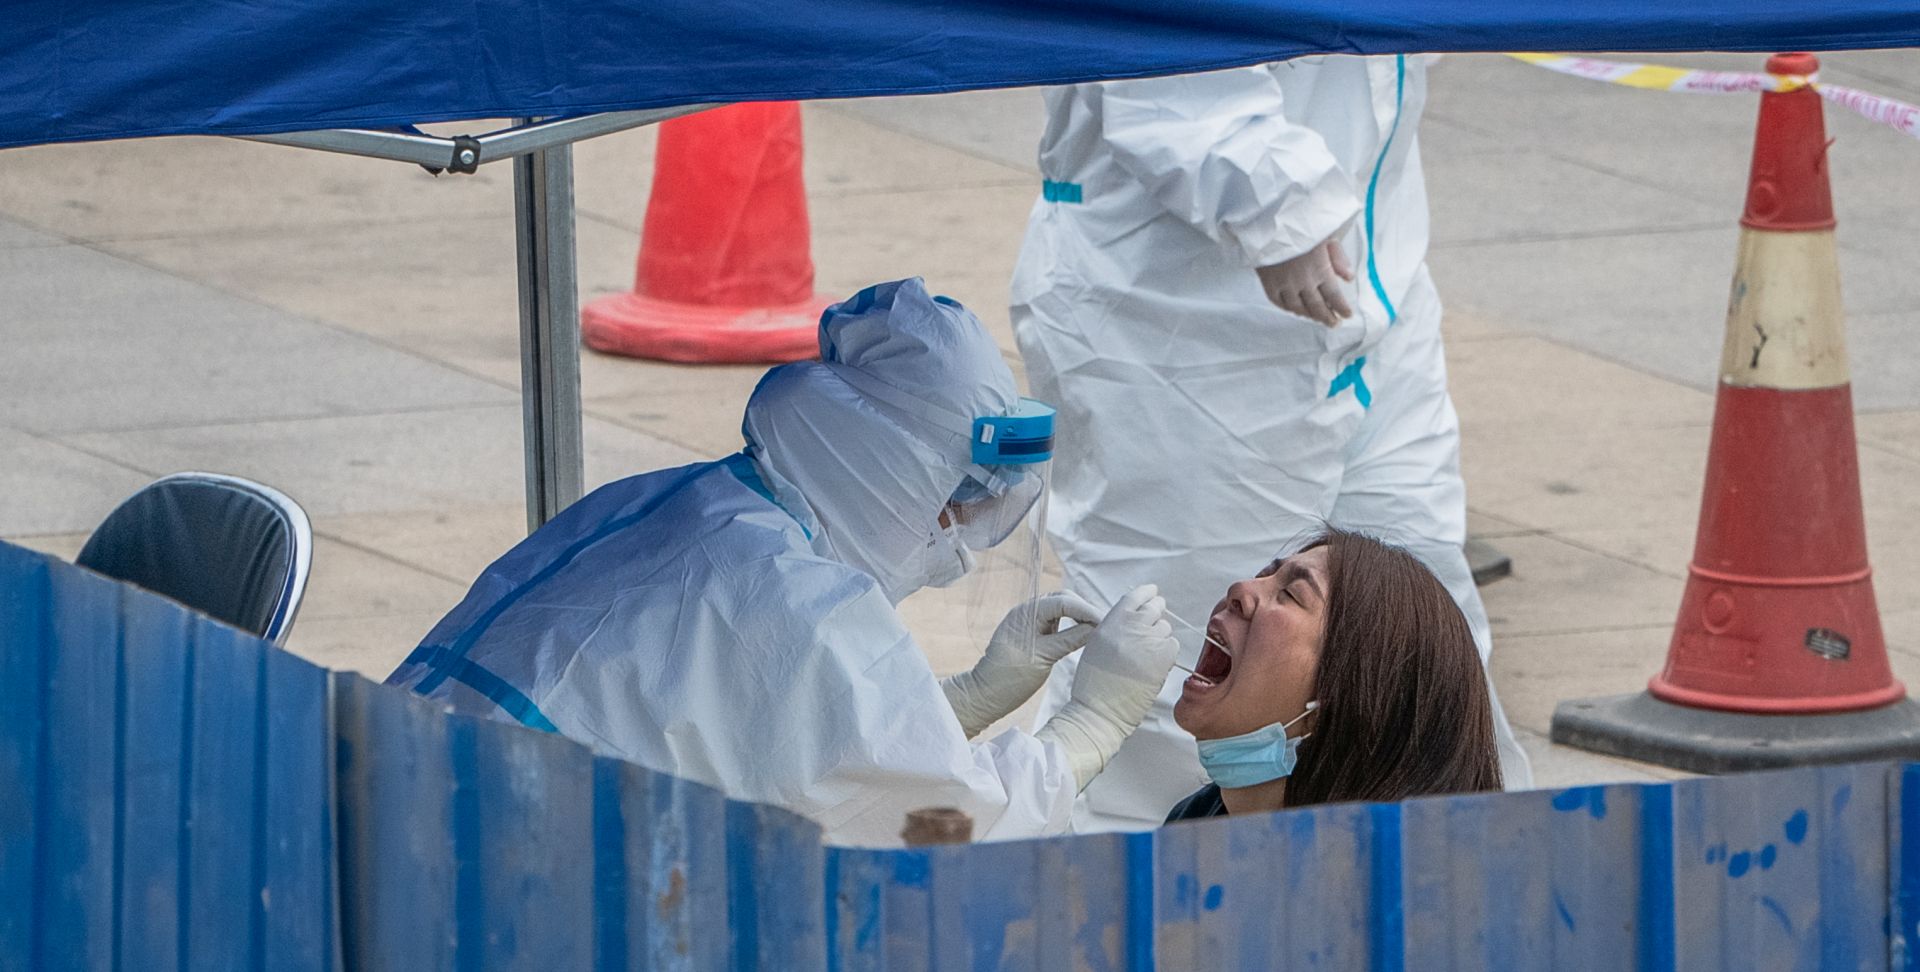 epa08490117 A woman is tested for COVID-19 at a makeshift coronavirus testing center, in Beijing, China, 17 June 2020. Beijing has given COVID-19 nucleic acid tests to 356,000 people since 13 June, according to the city's government officials, as the number of new coronavirus cases is continuing to increase in the city.  EPA/ROMAN PILIPEY